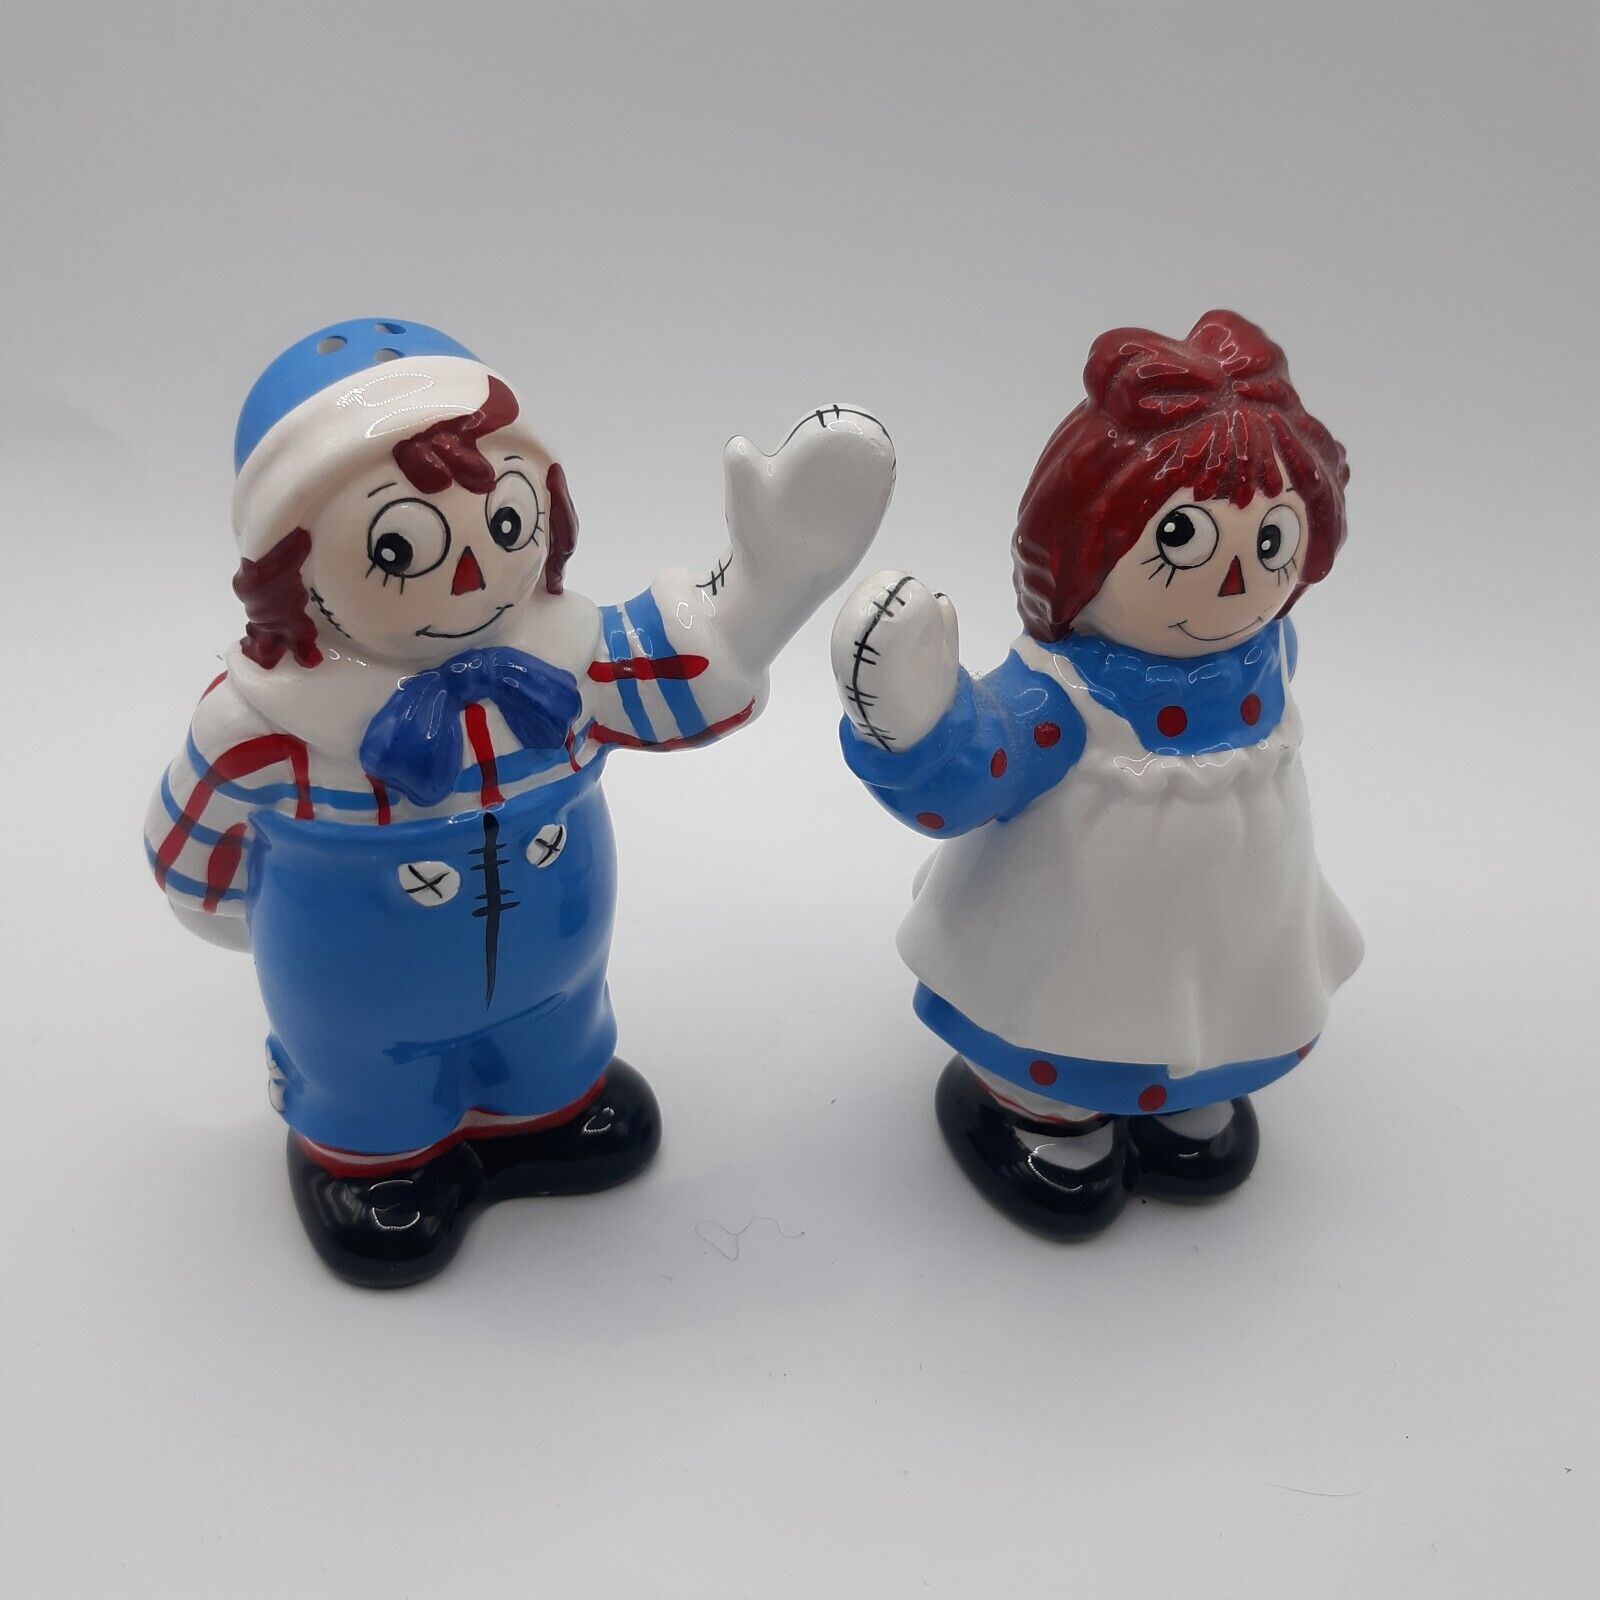 Raggedy Ann and Annie Salt and Pepper Shakers Novelty 1993